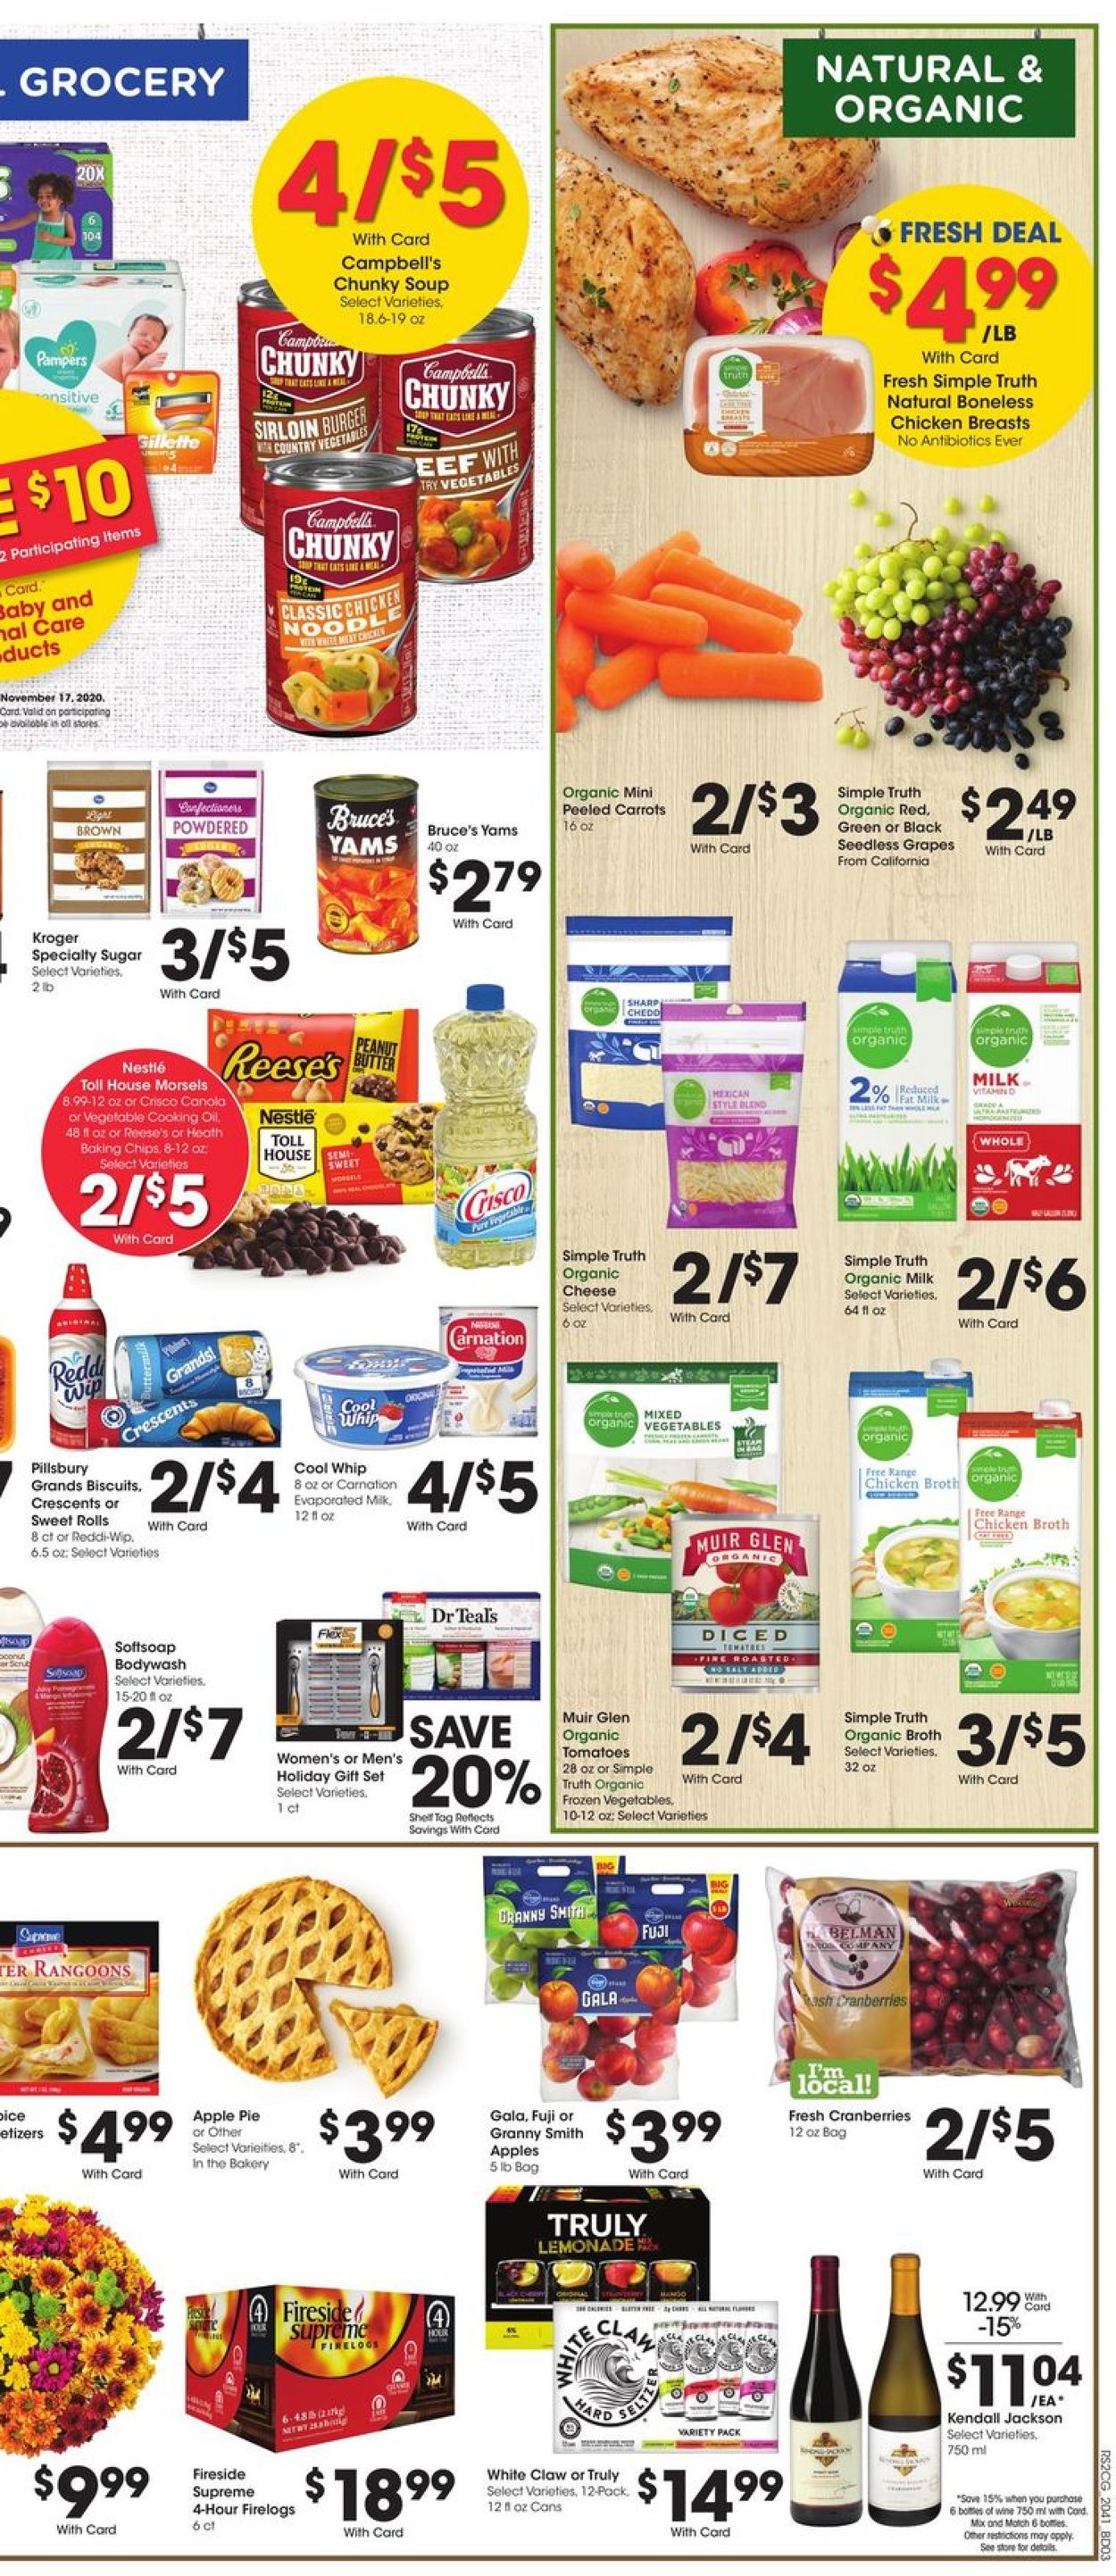 Metro Market Current weekly ad 11/11 - 12/17/2020 [6] - frequent-ads.com